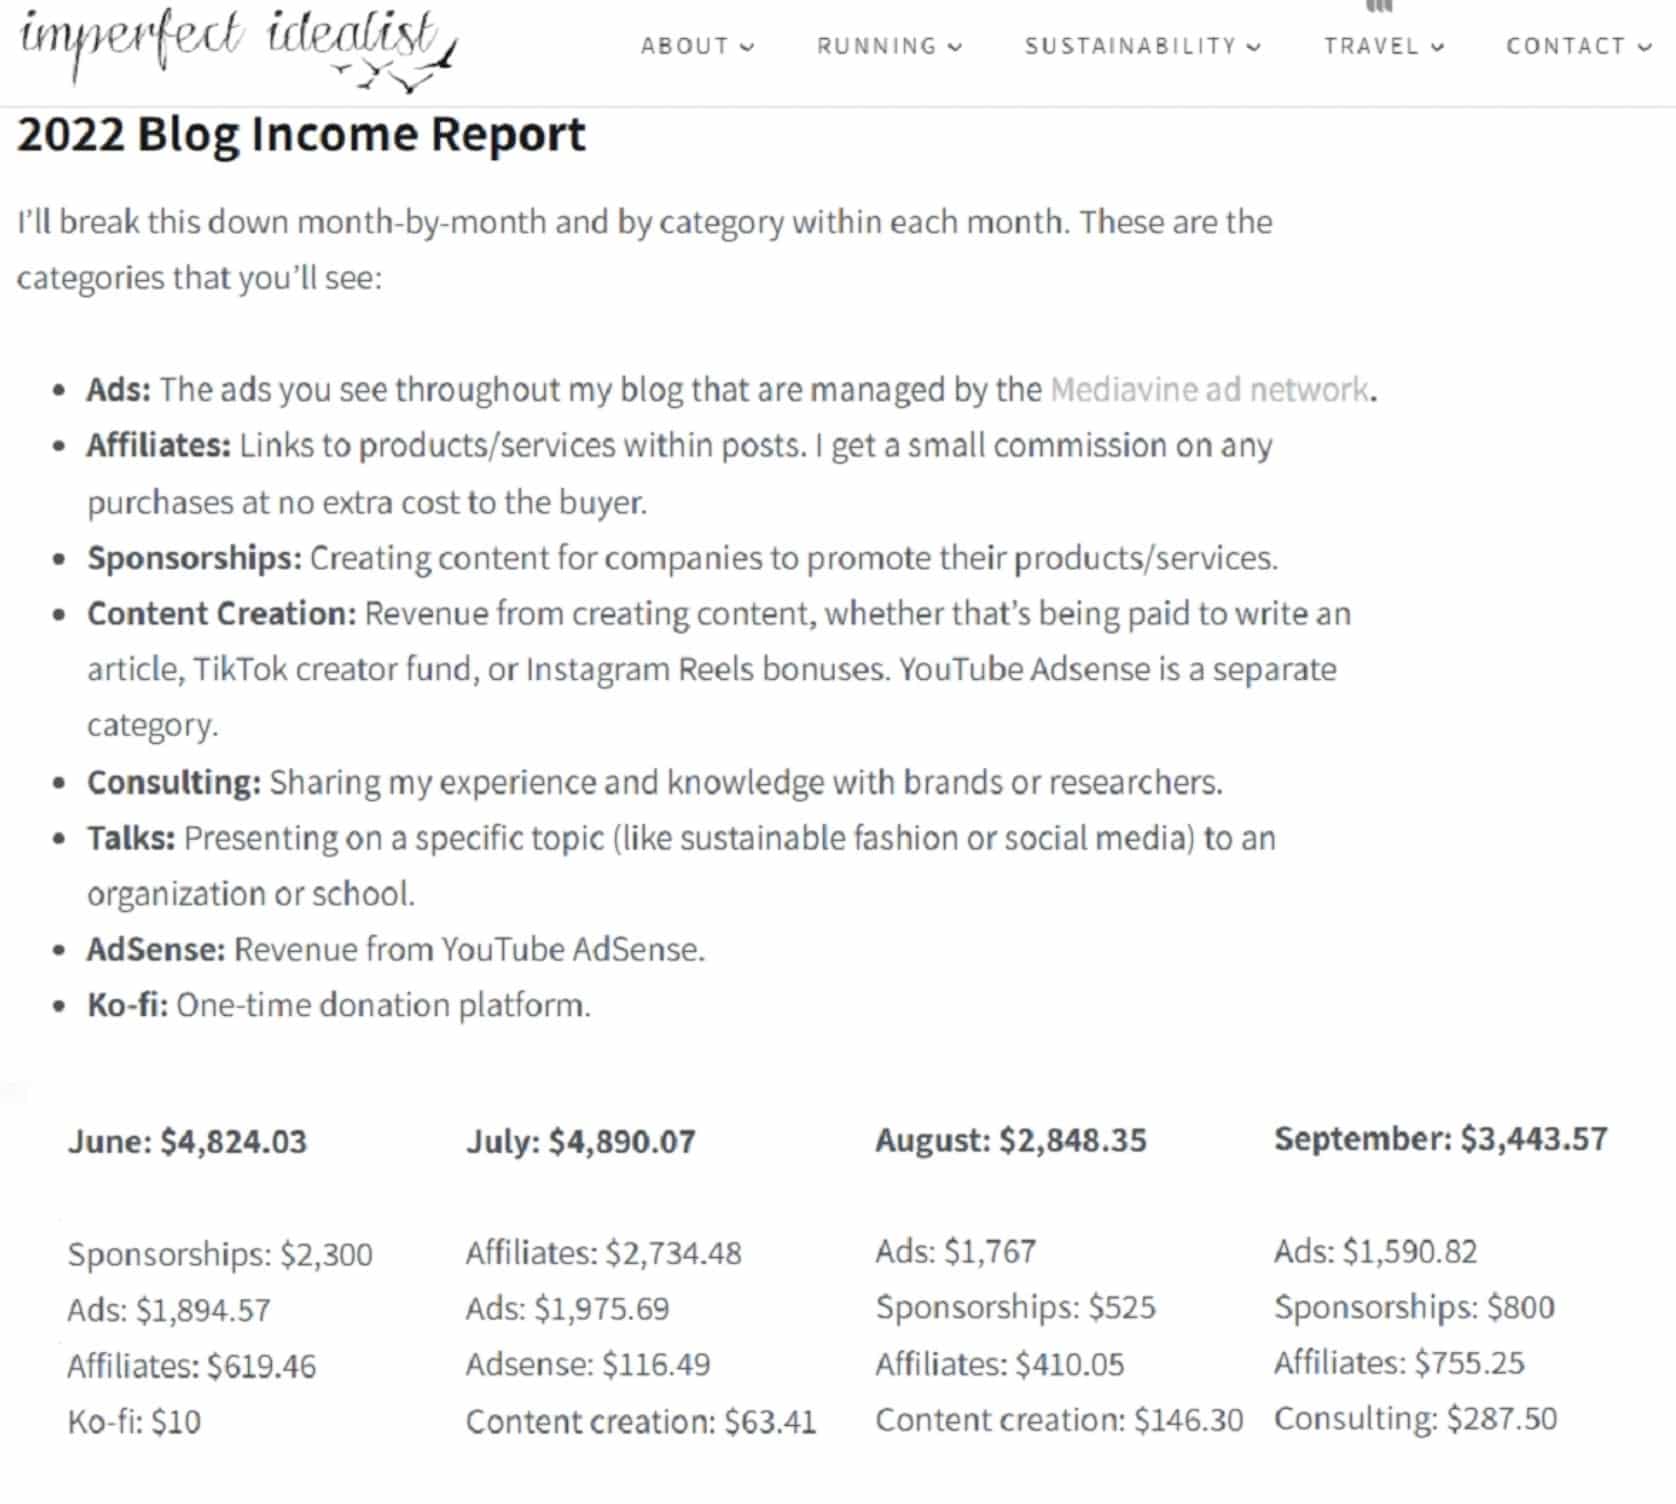 Imperfect Idealist income reports